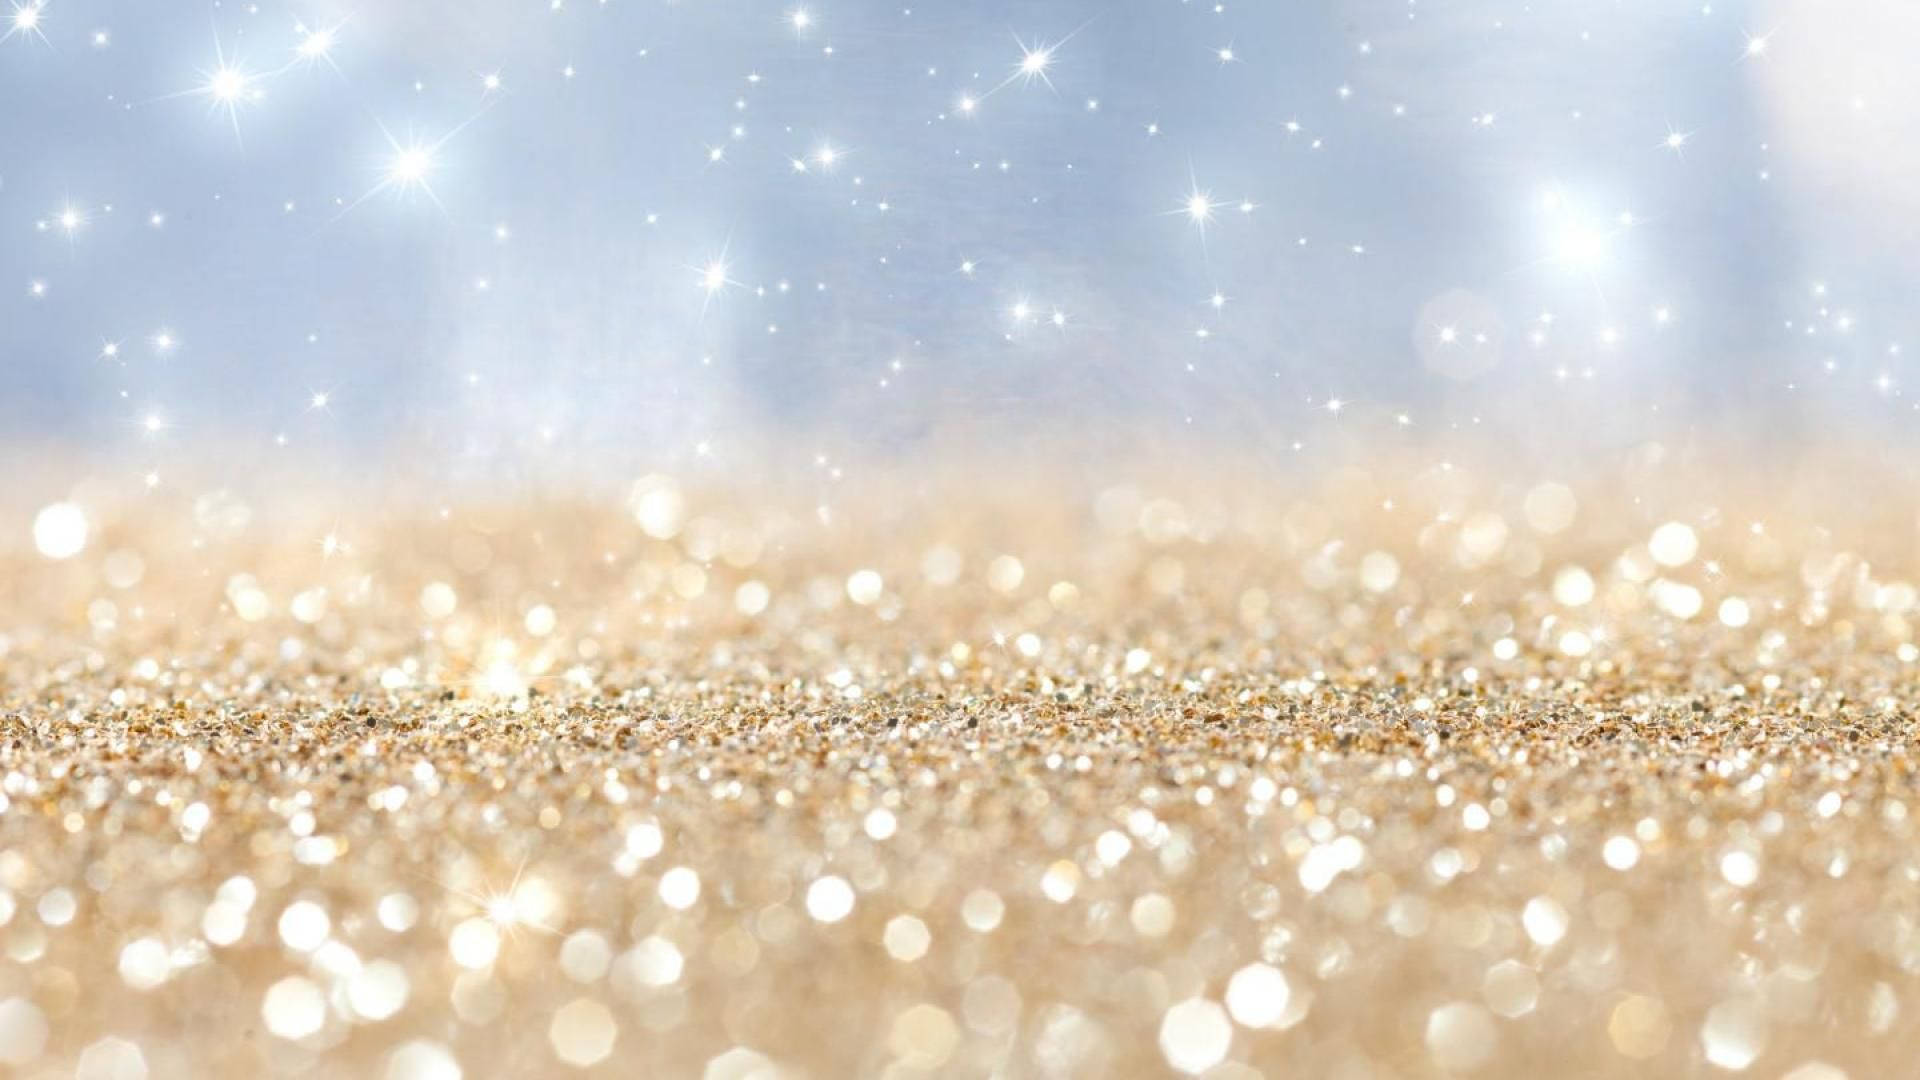 Add shimmer and sparkle to your life with Glitter Wallpaper